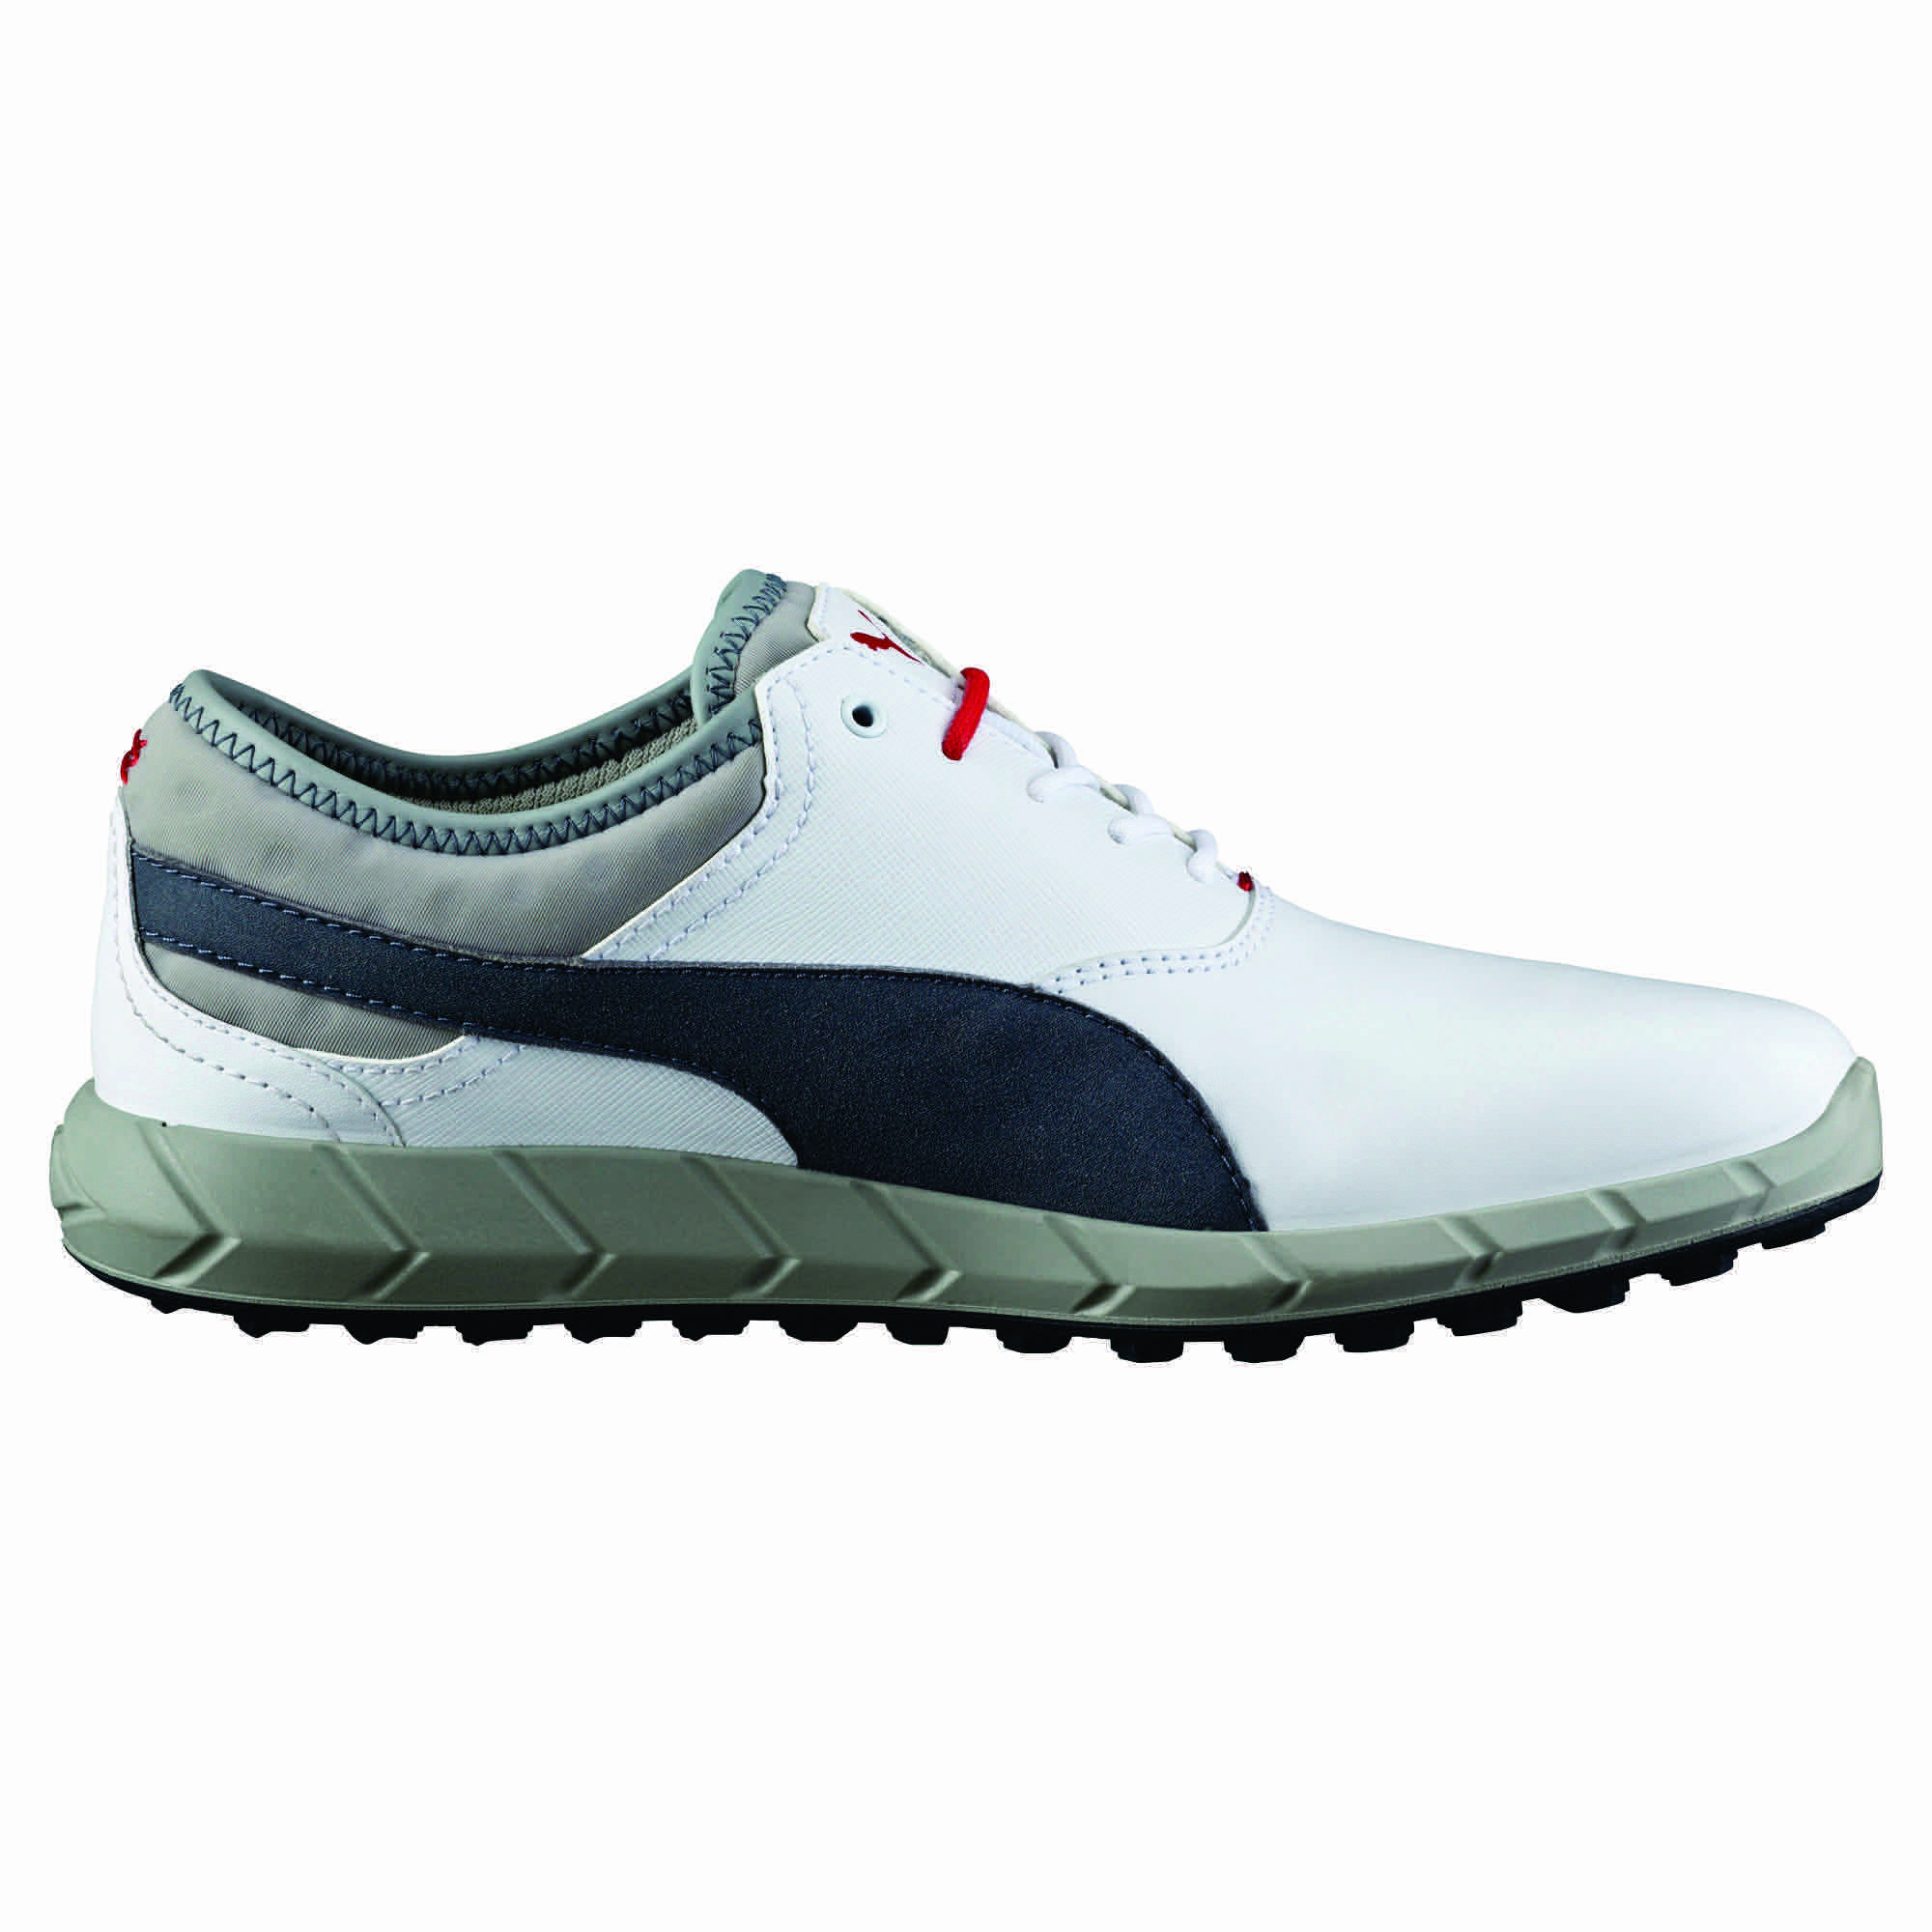 6 Of The Best Summer Golf Shoes 